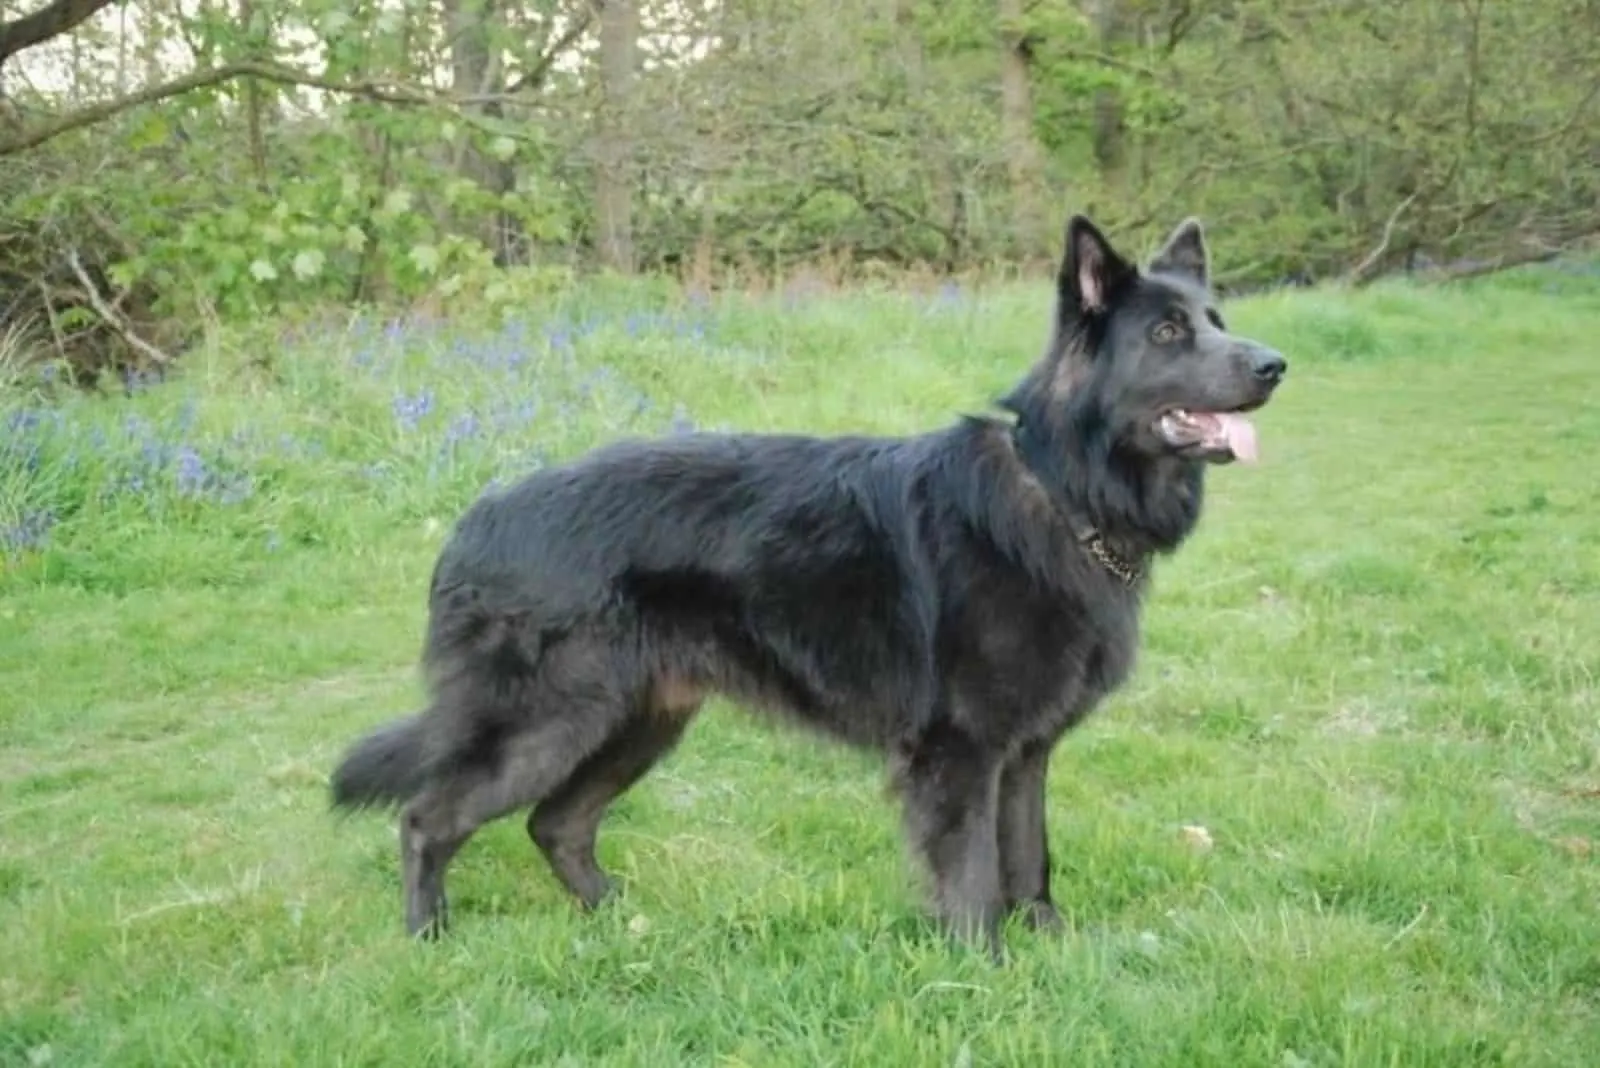 Blue Bay Shepherd stands in the grass